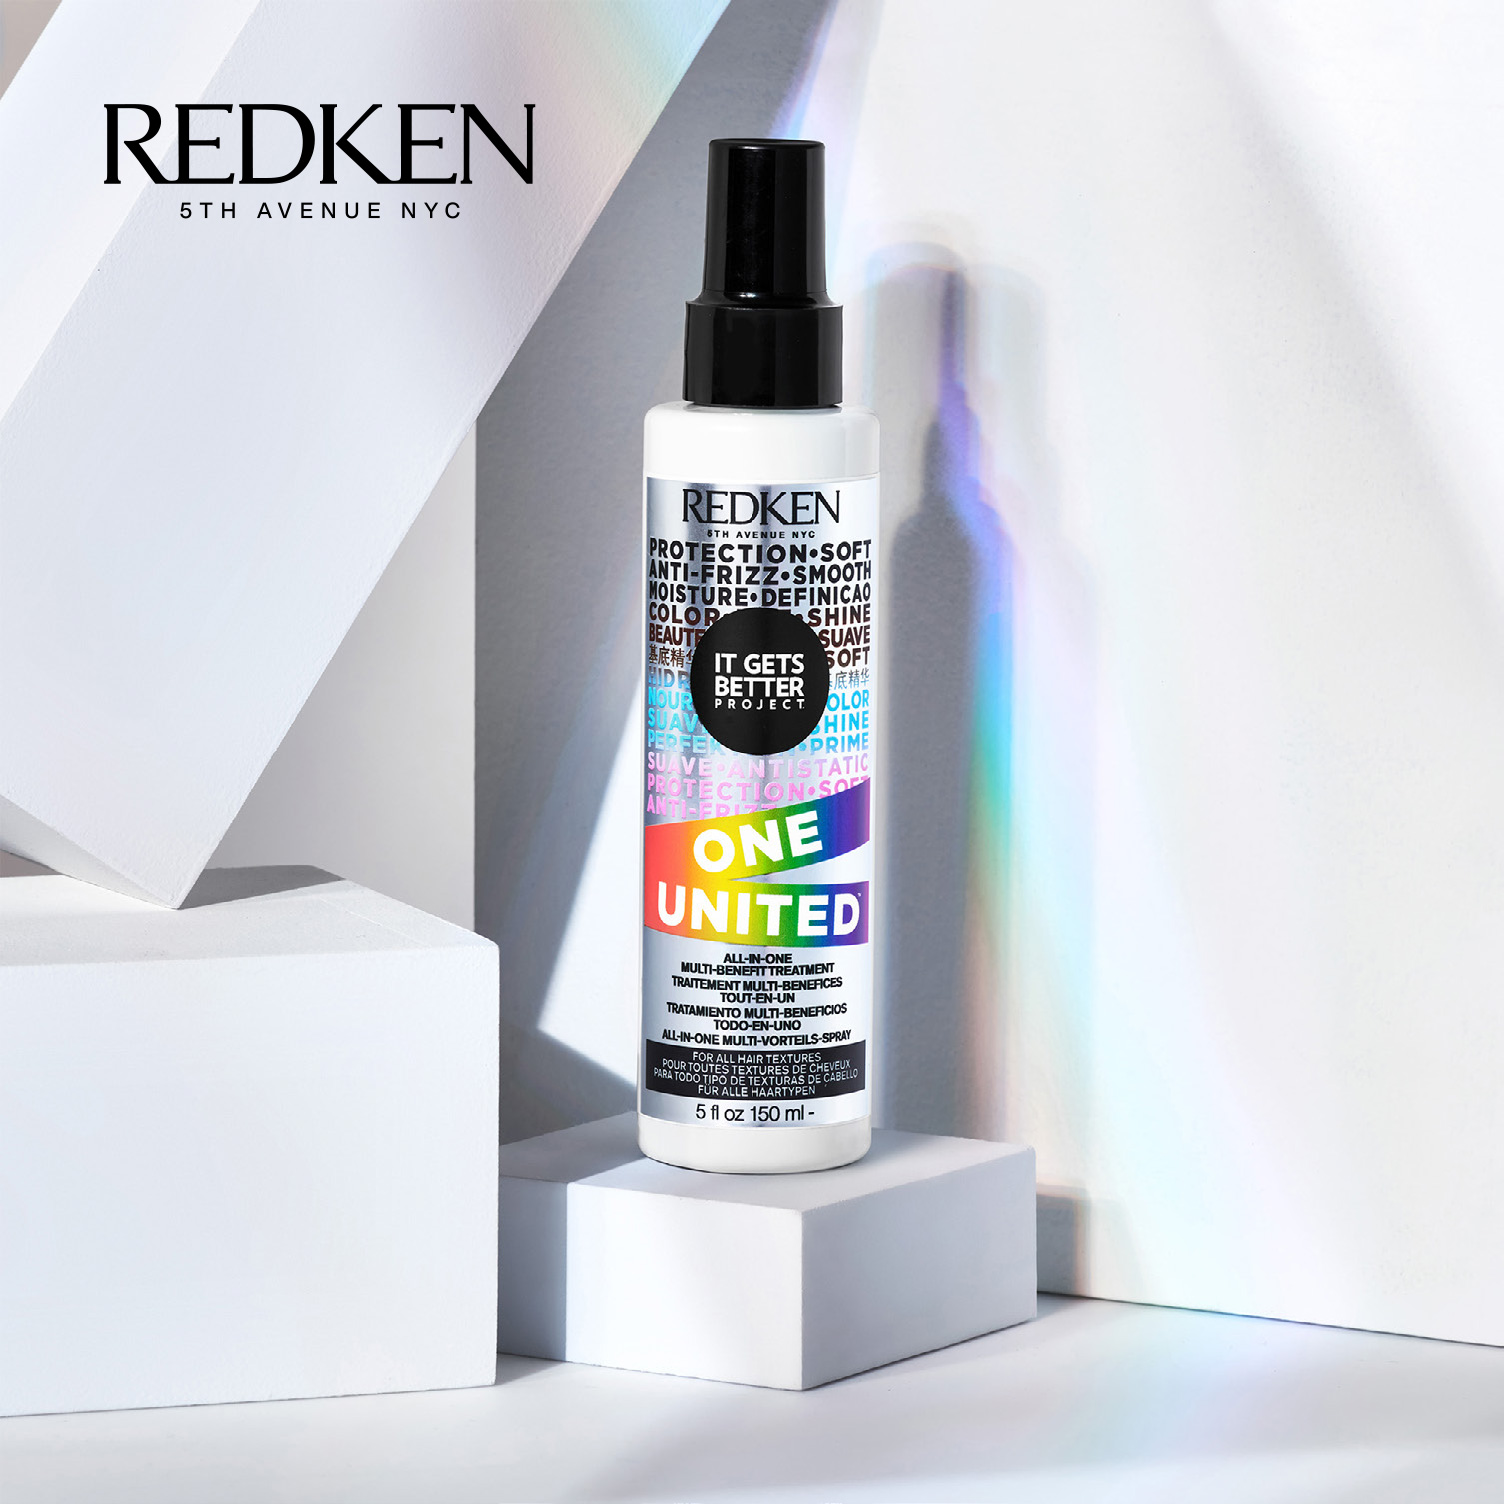 Redken One United Limited Edition Treatment